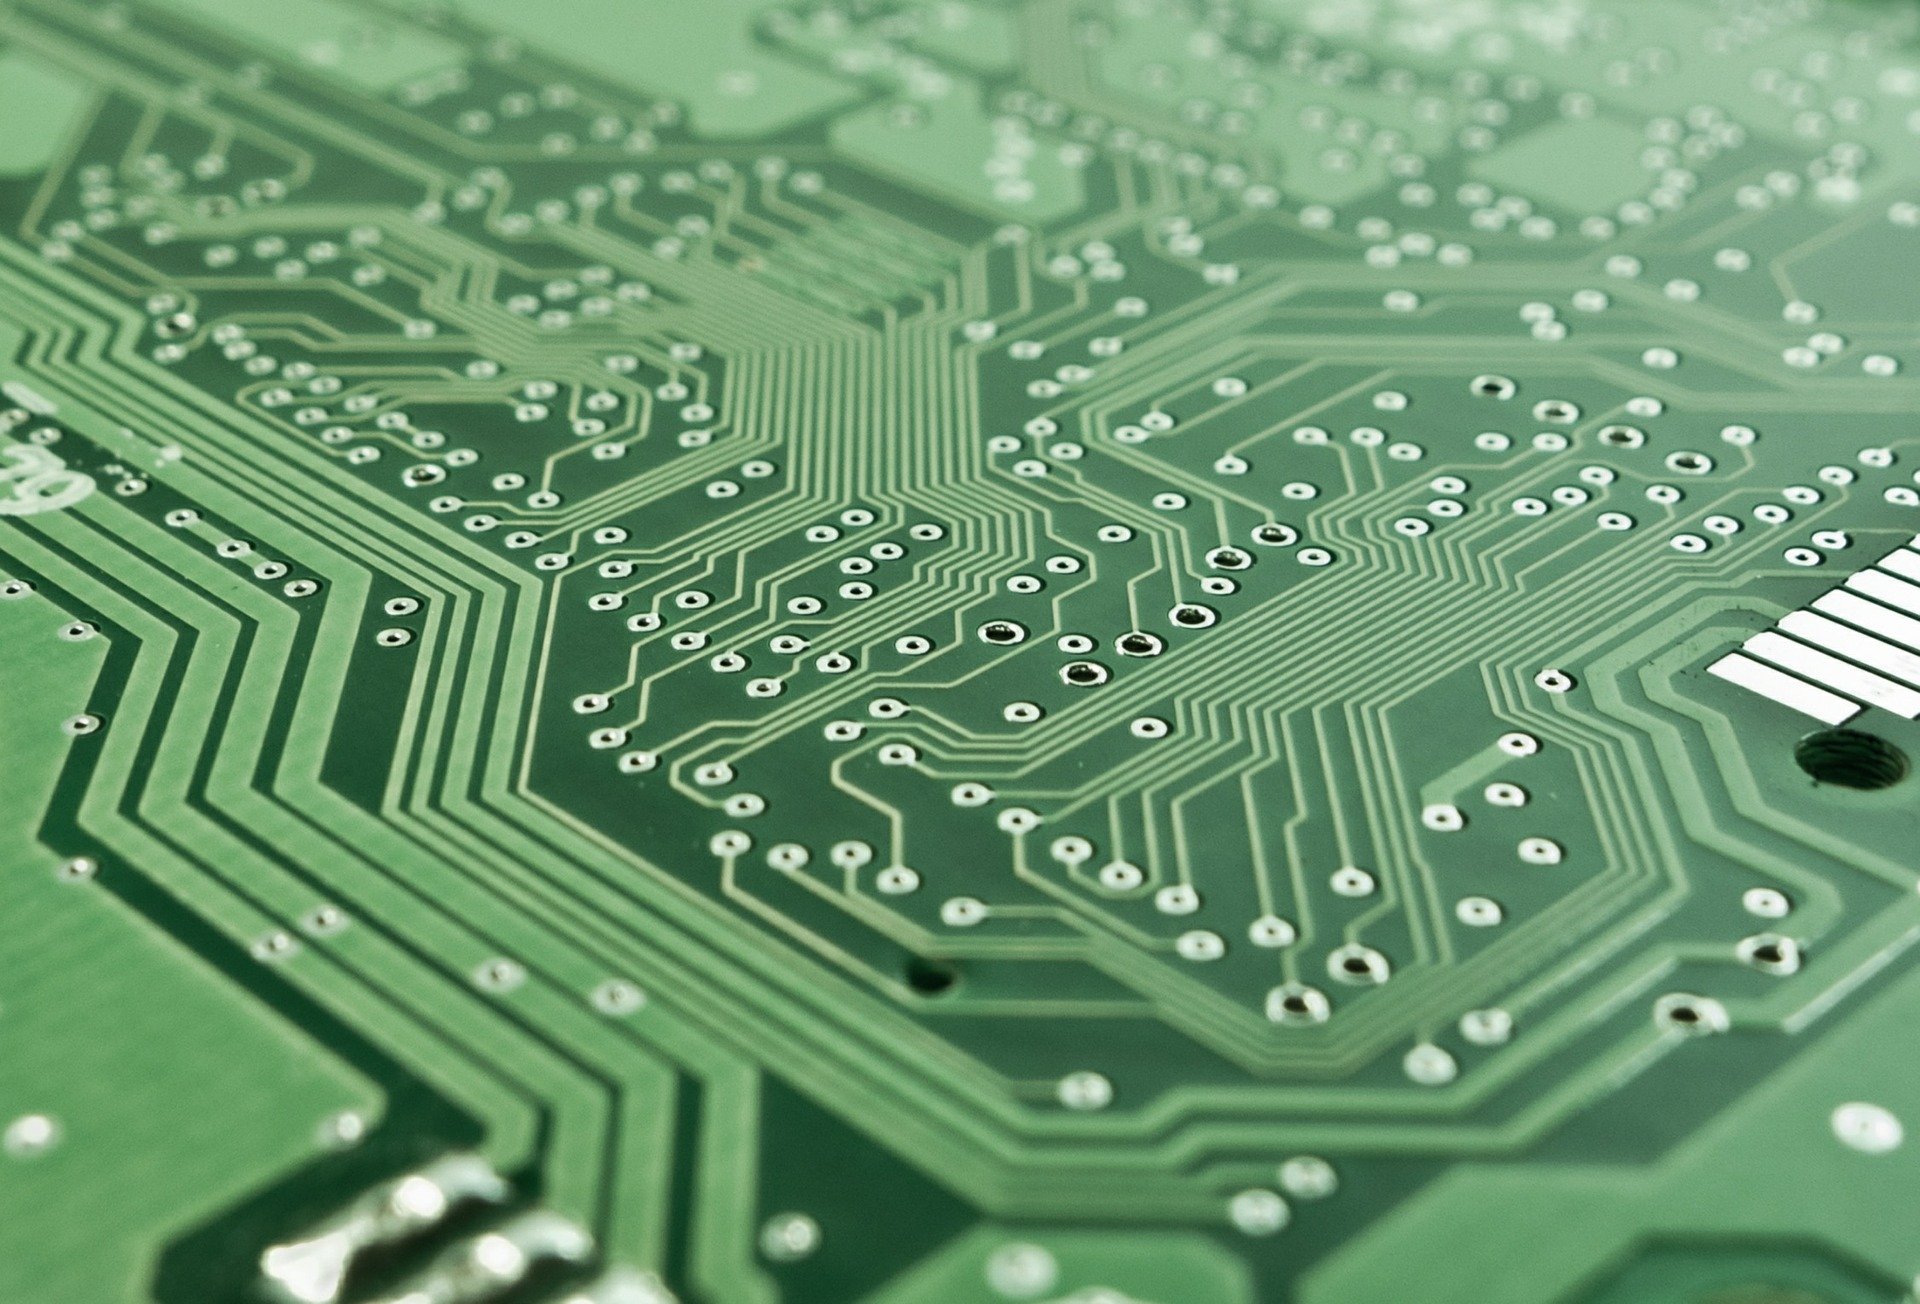 A close-up image of a green electric circuit board